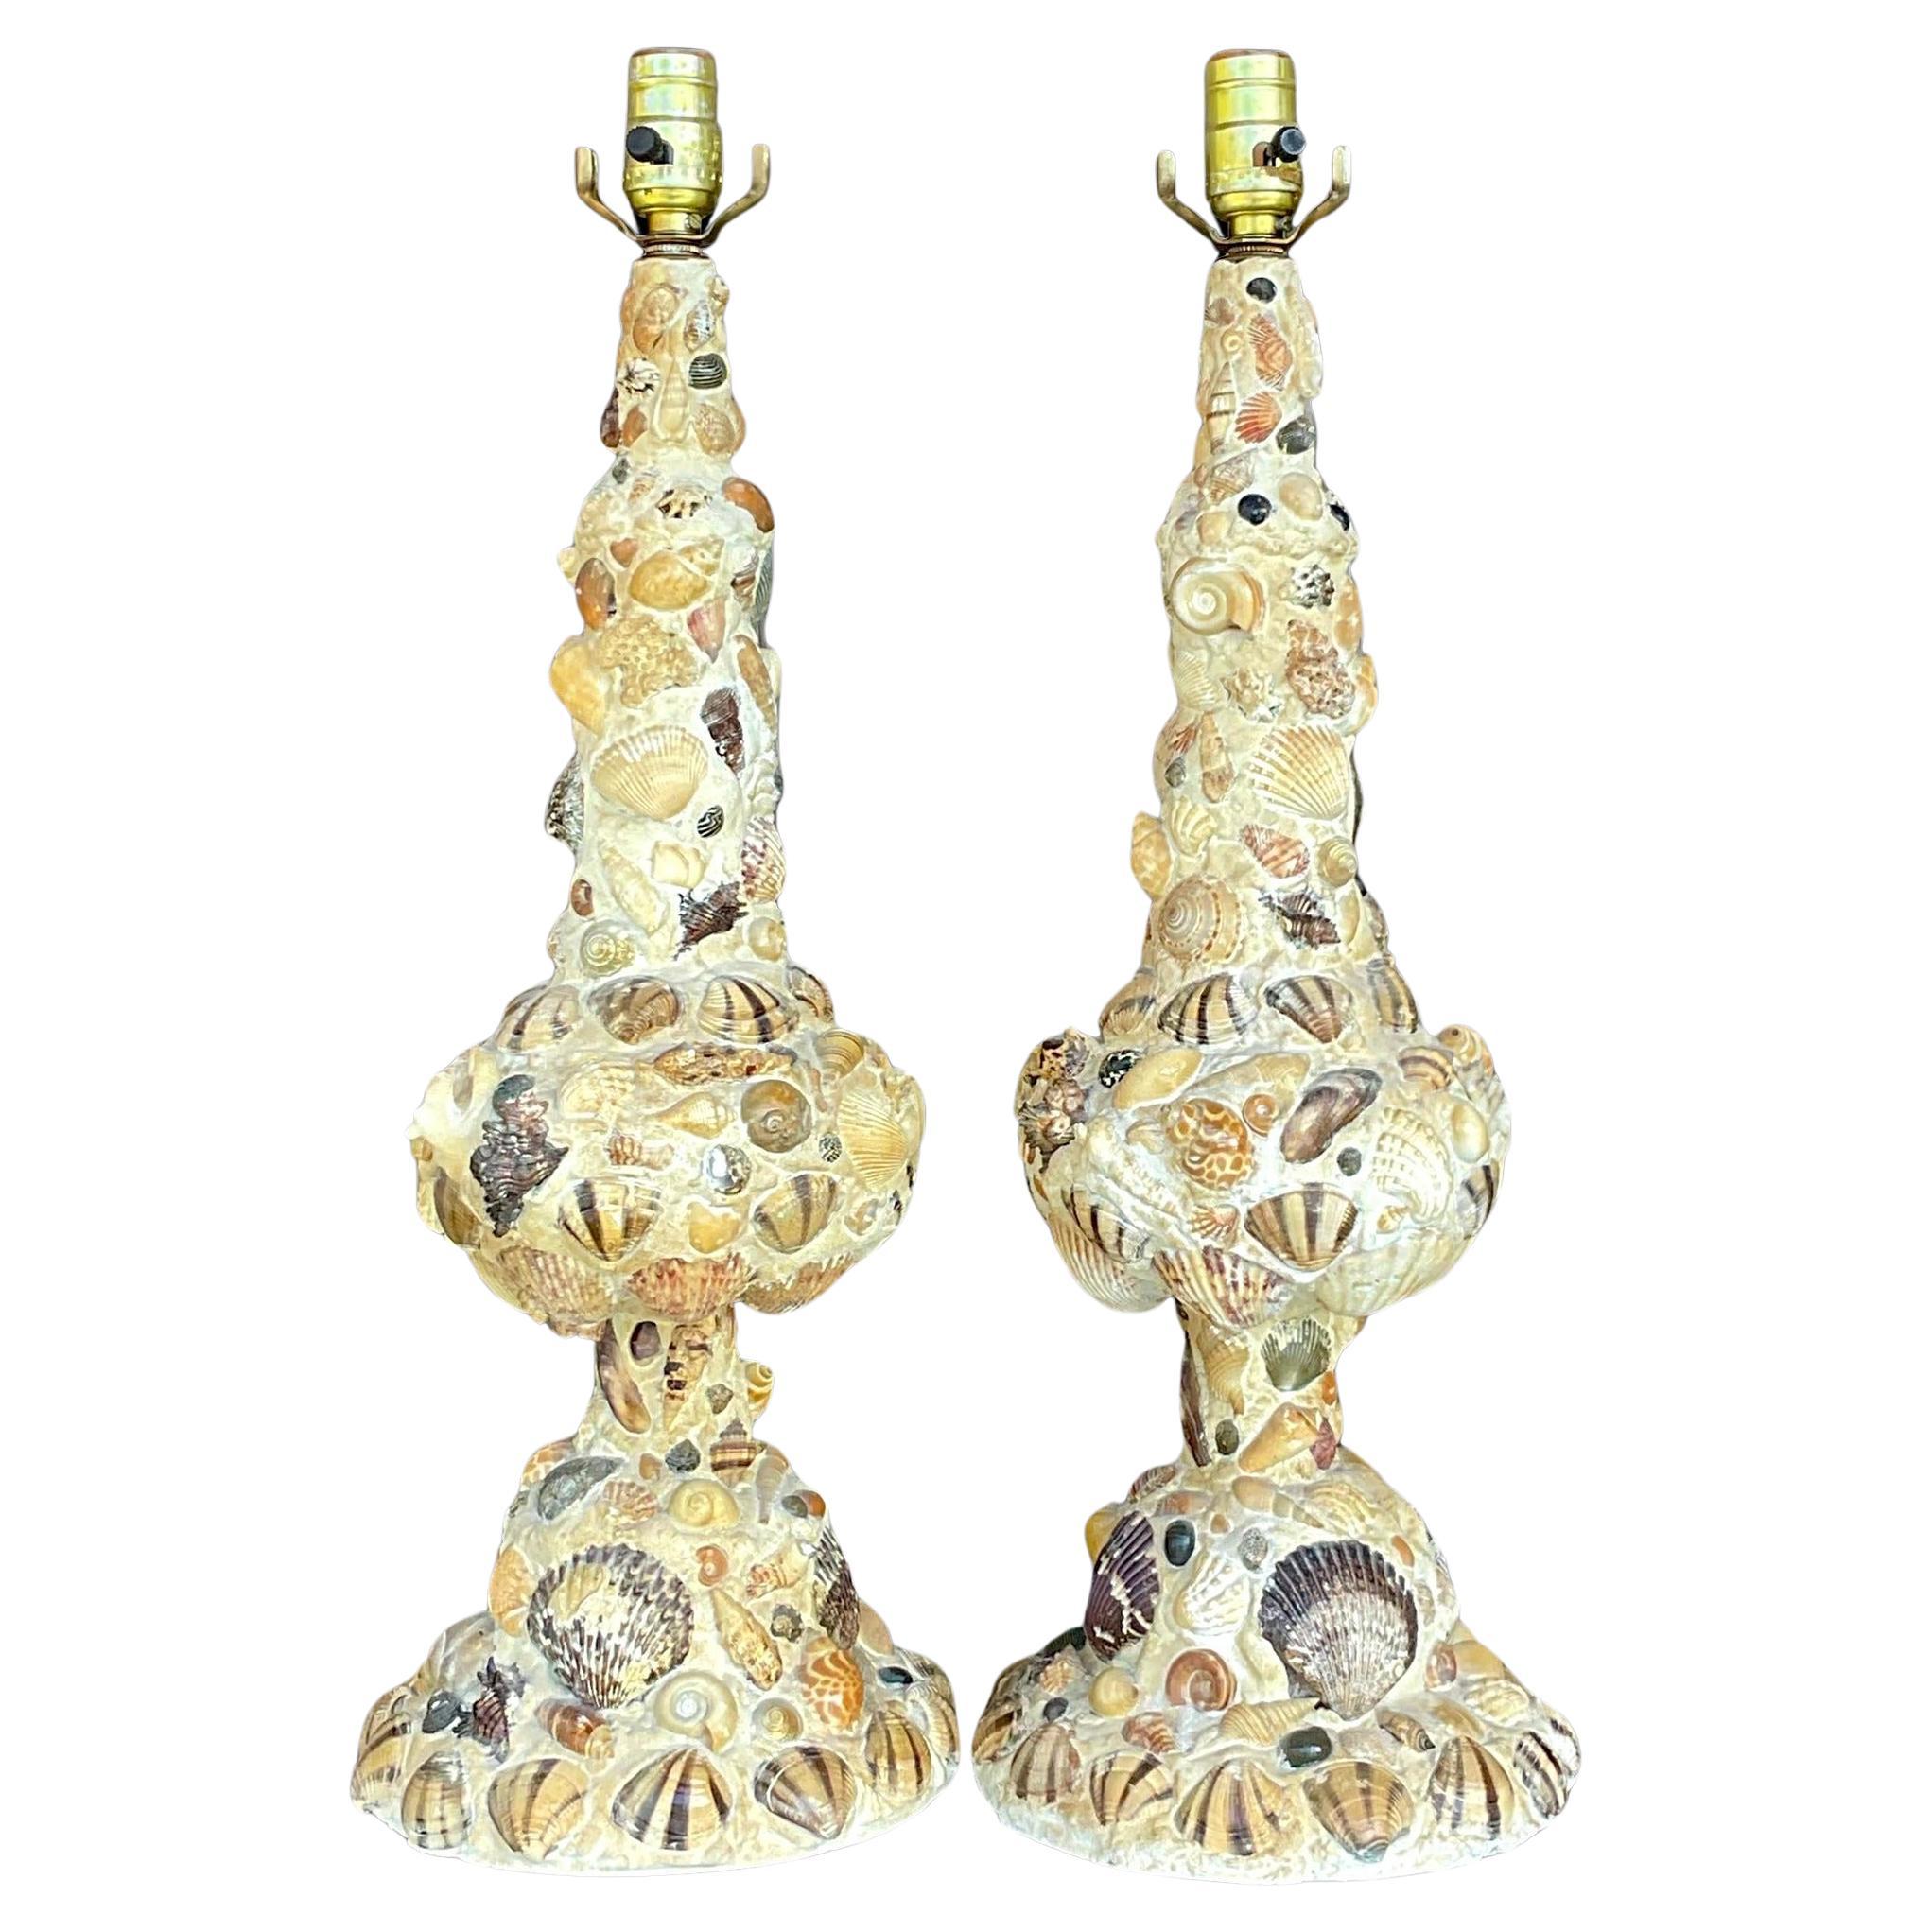 Vintage Coastal Shell Encrusted Table Lamps - a Pair For Sale